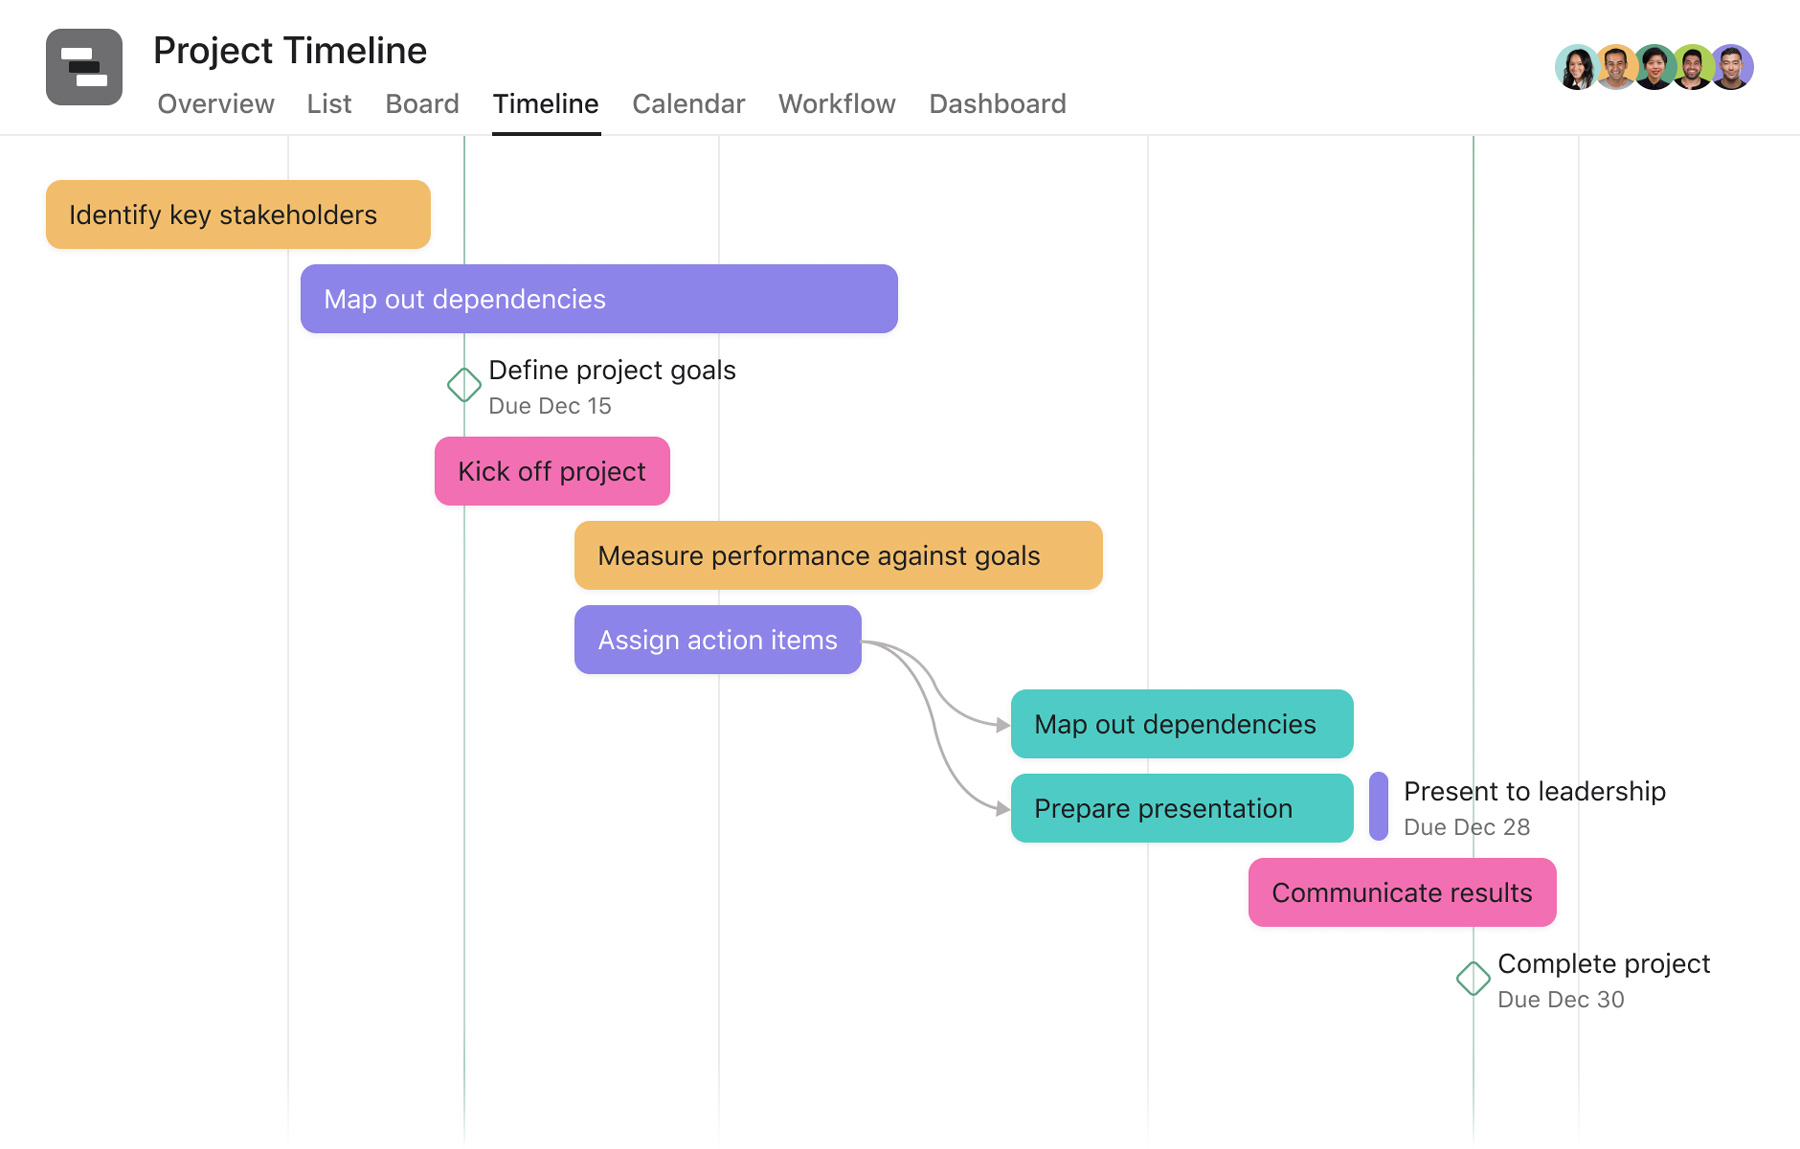 [Timeline View] Gantt chart project, organized timeline view in Asana with dependencies and due dates